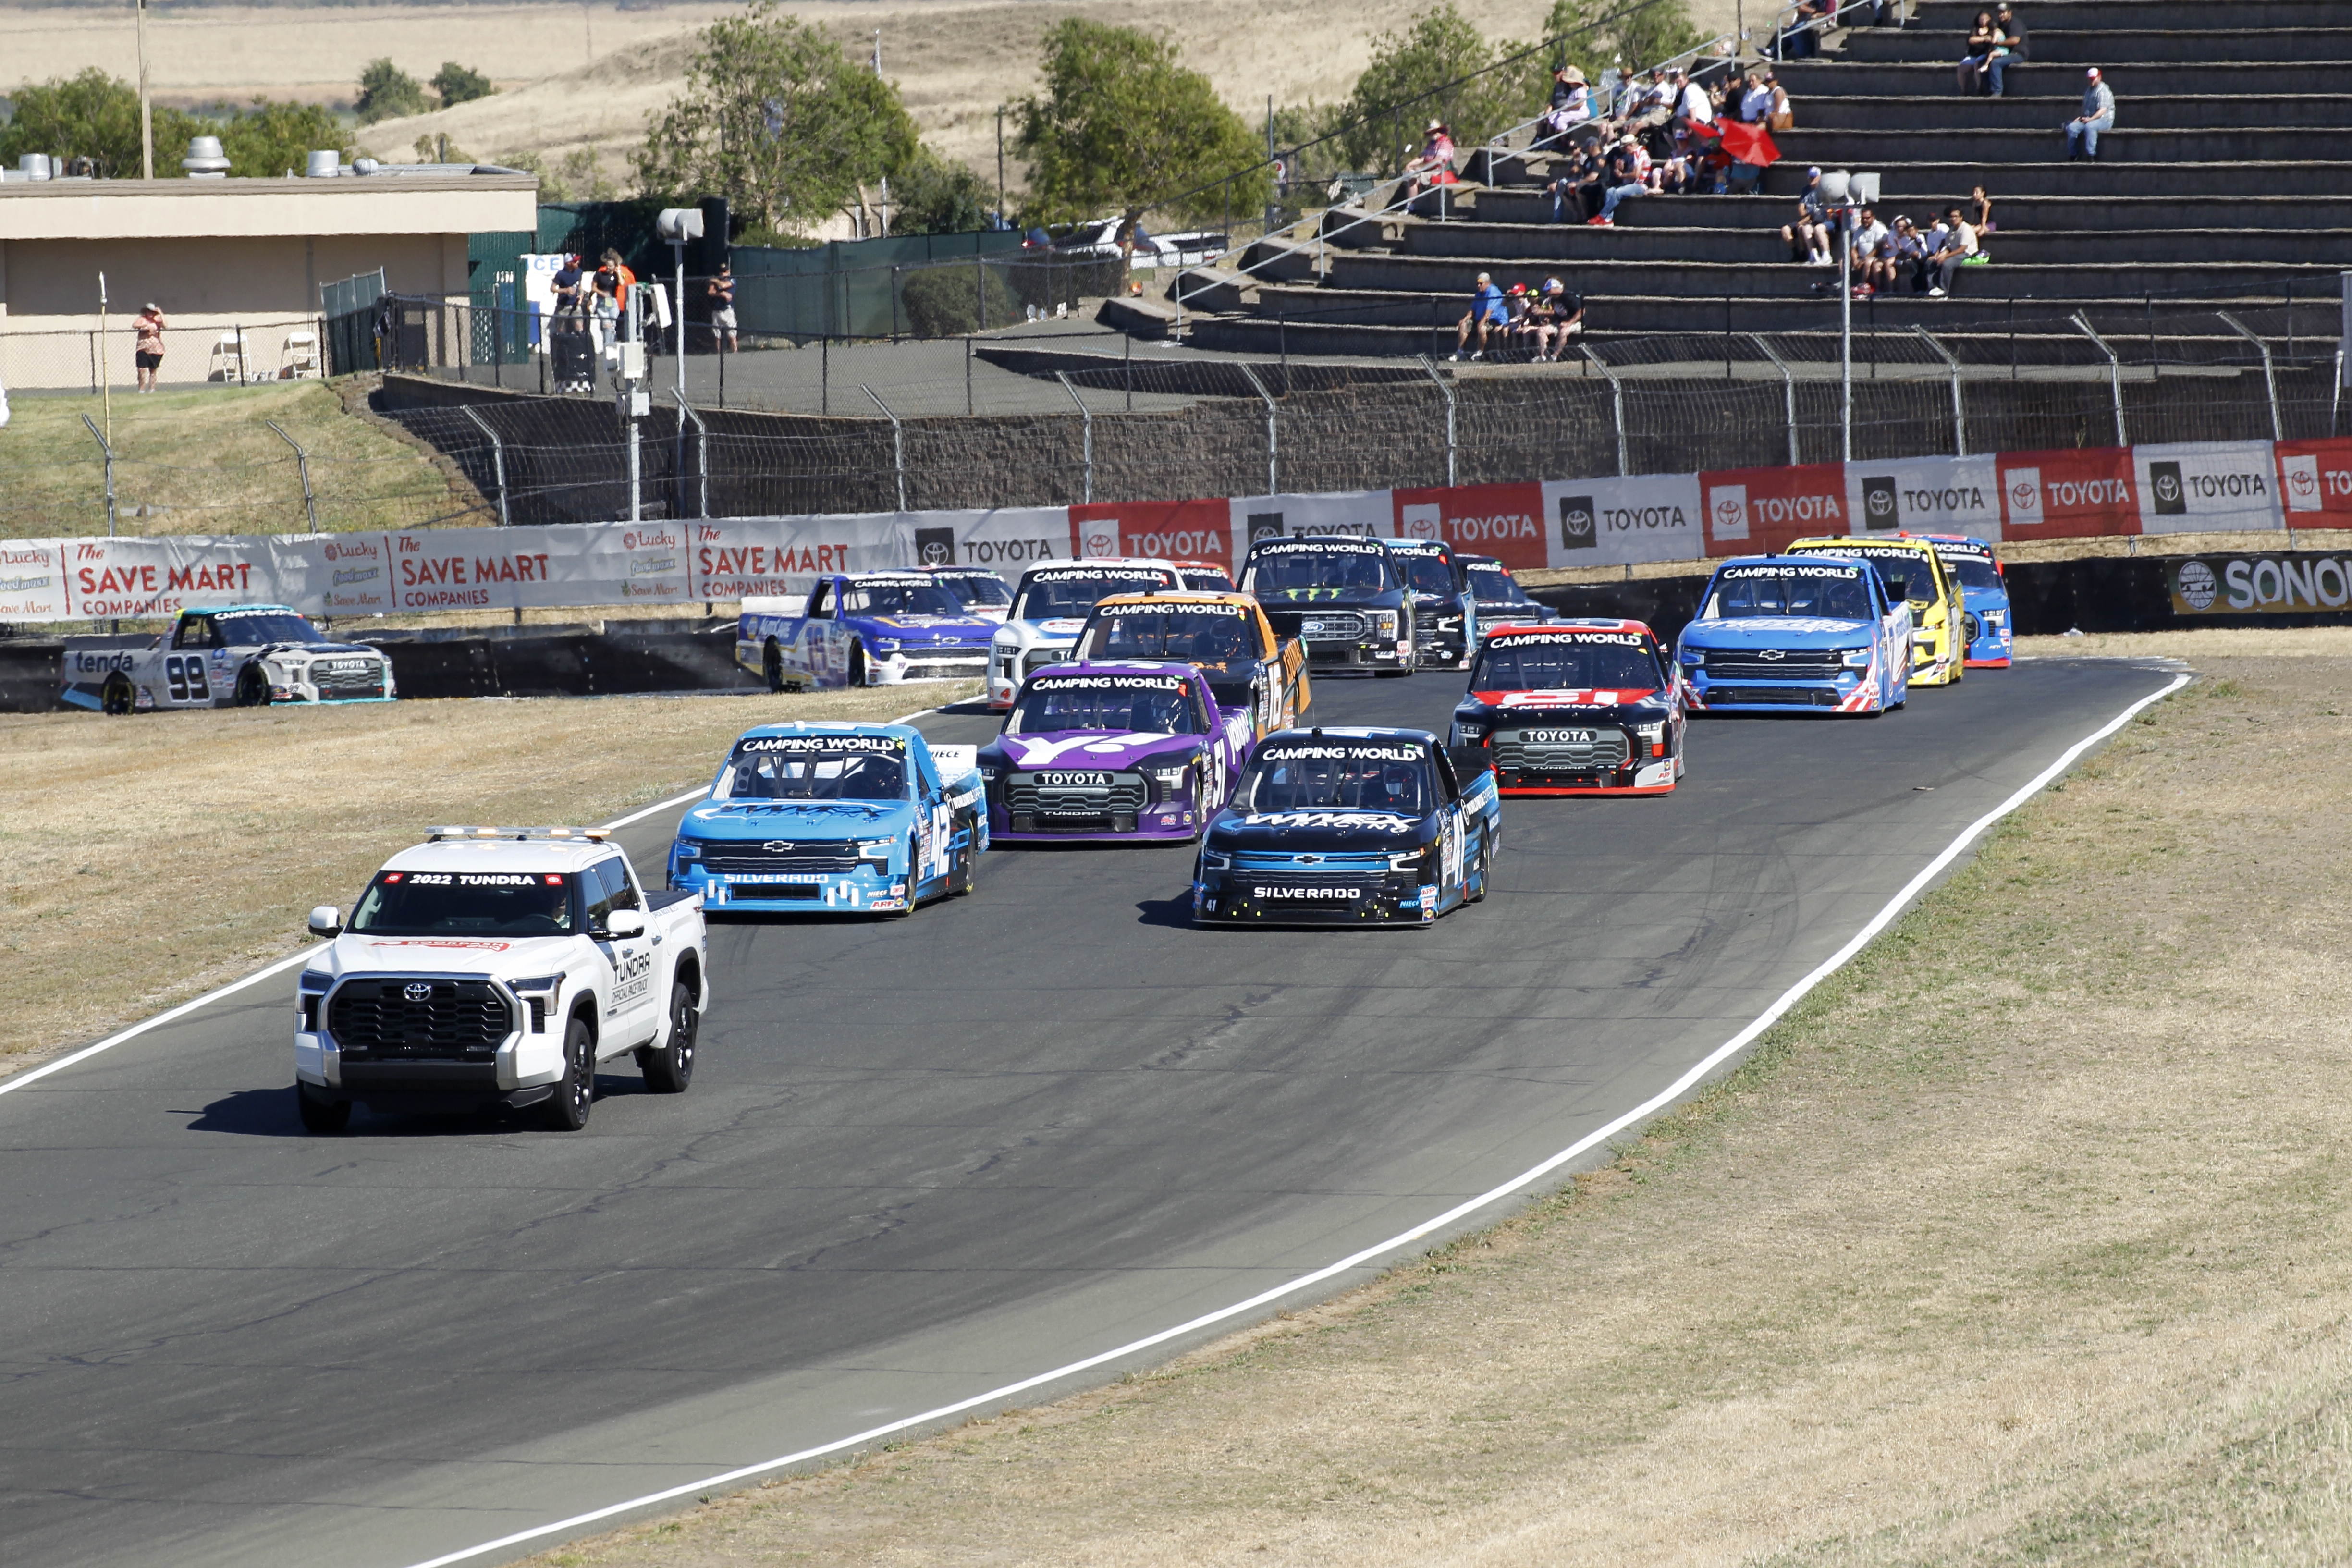 The pace truck leads the cars during the NASCAR Camping World Truck Series DoorDash 250 on June 11, 2022 at Sonoma Raceway in Sonoma, CA.